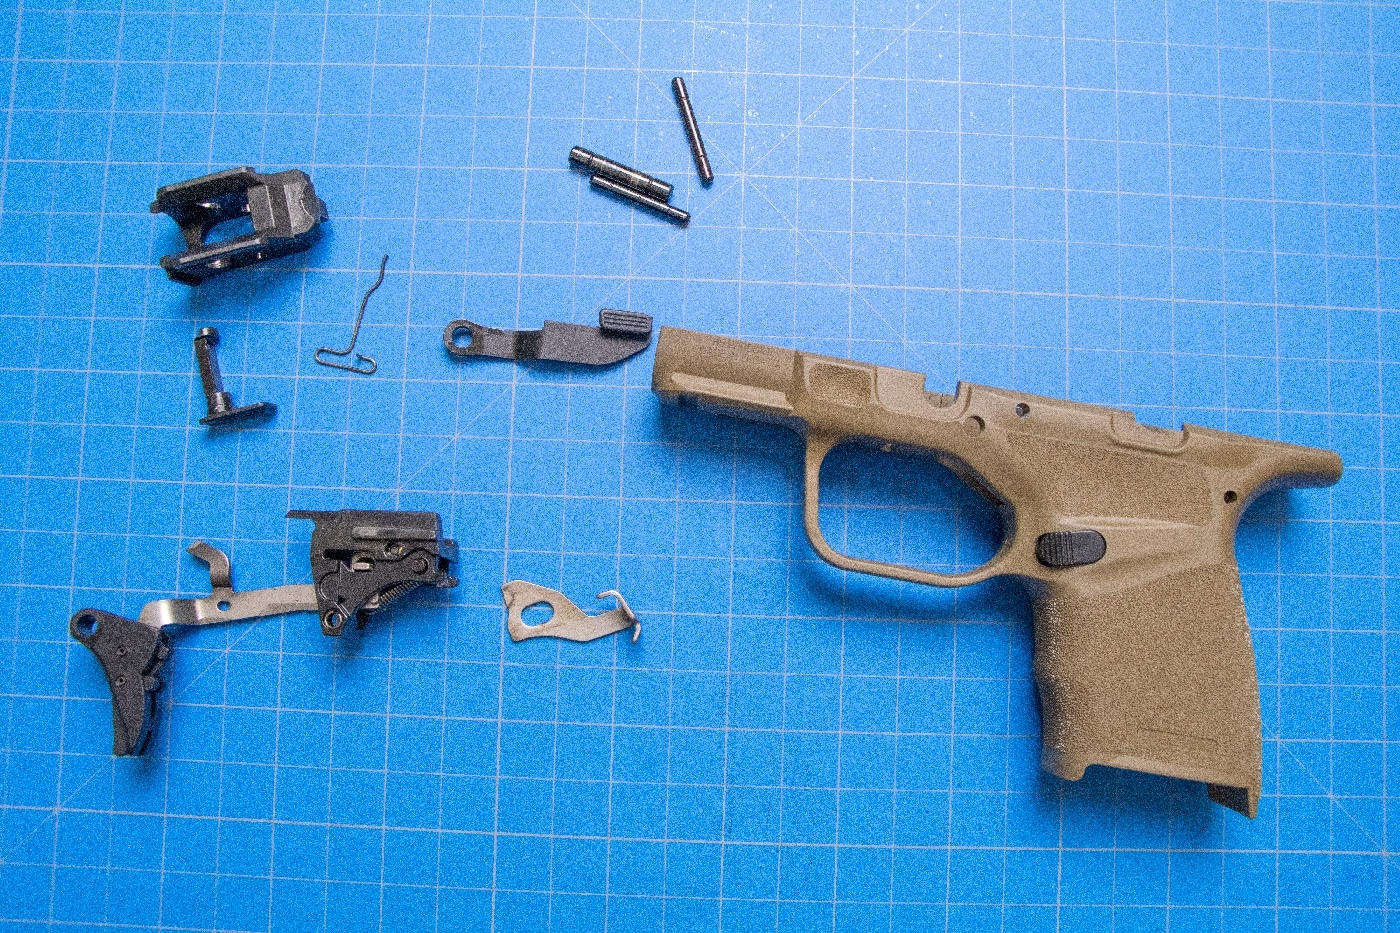 In this photo, we see where a prepper disassembled a Springfield 9mm pistol. We see the trigger assembly, slide stop, pins and other parts next to the polymer frame.